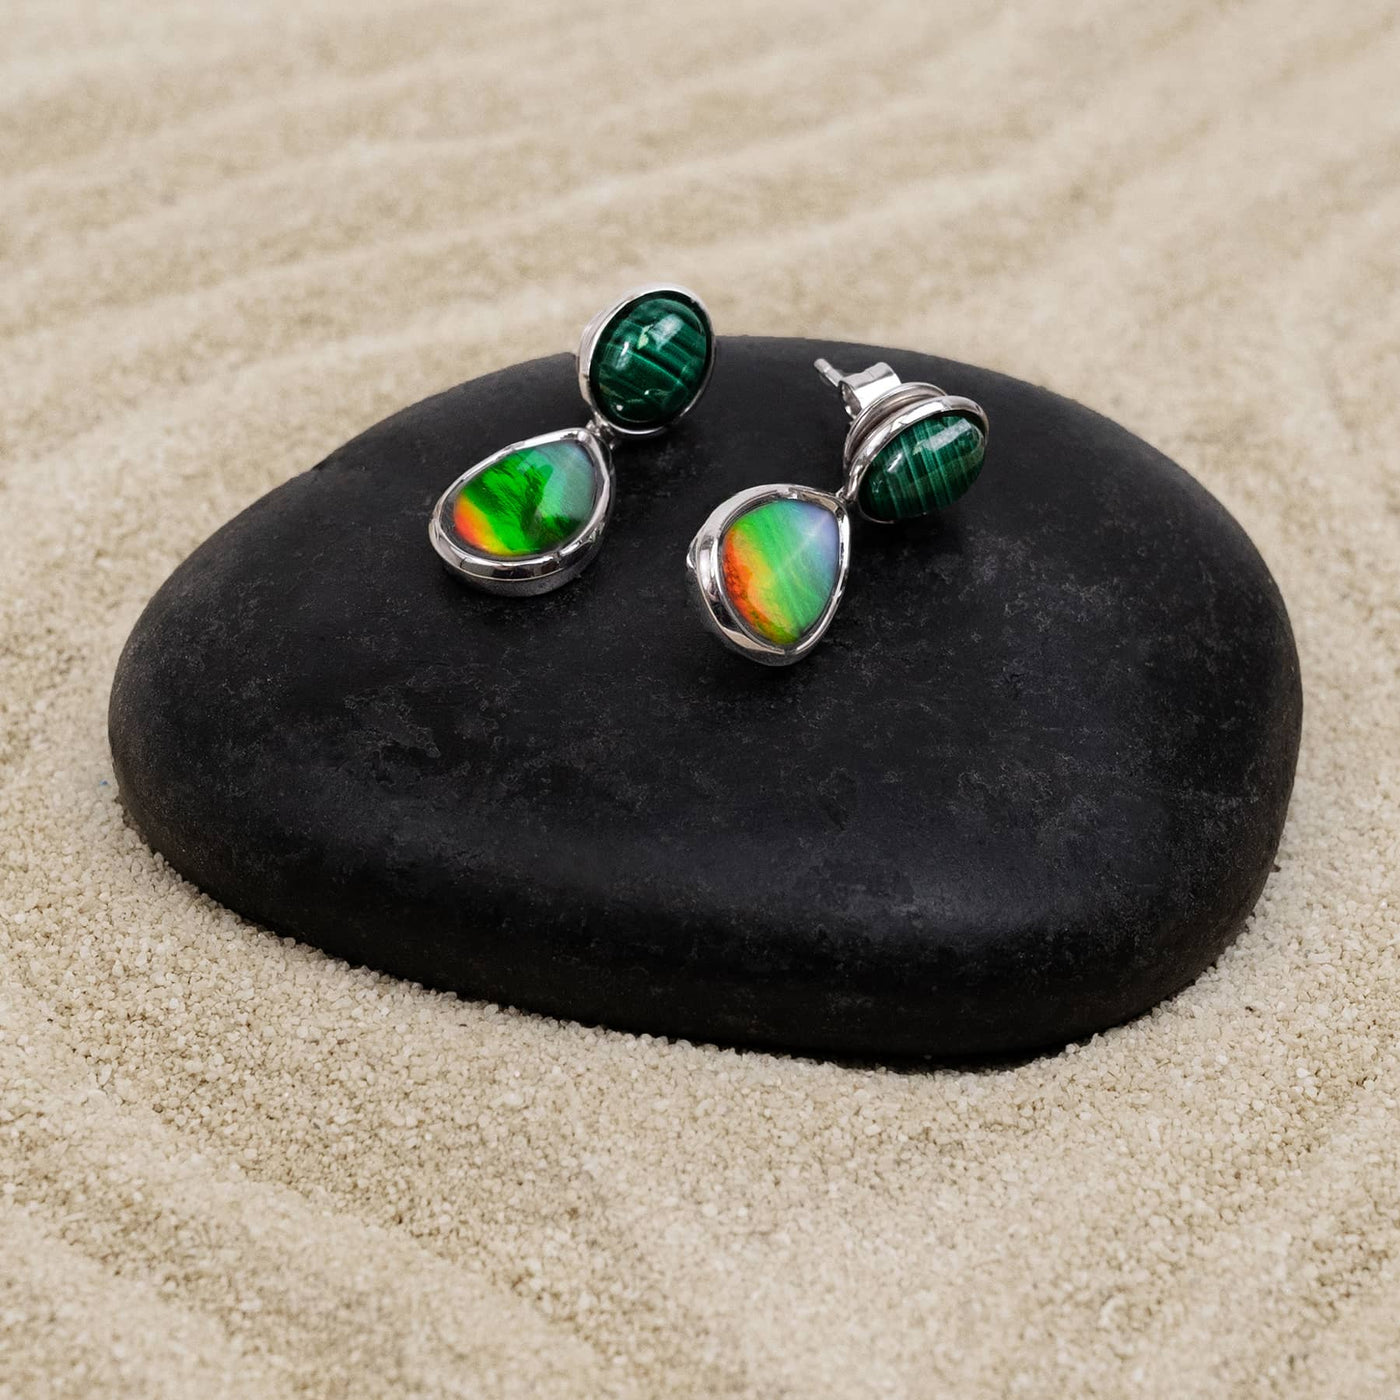 Harmony Ammolite Earrings in Sterling Silver with Malachite